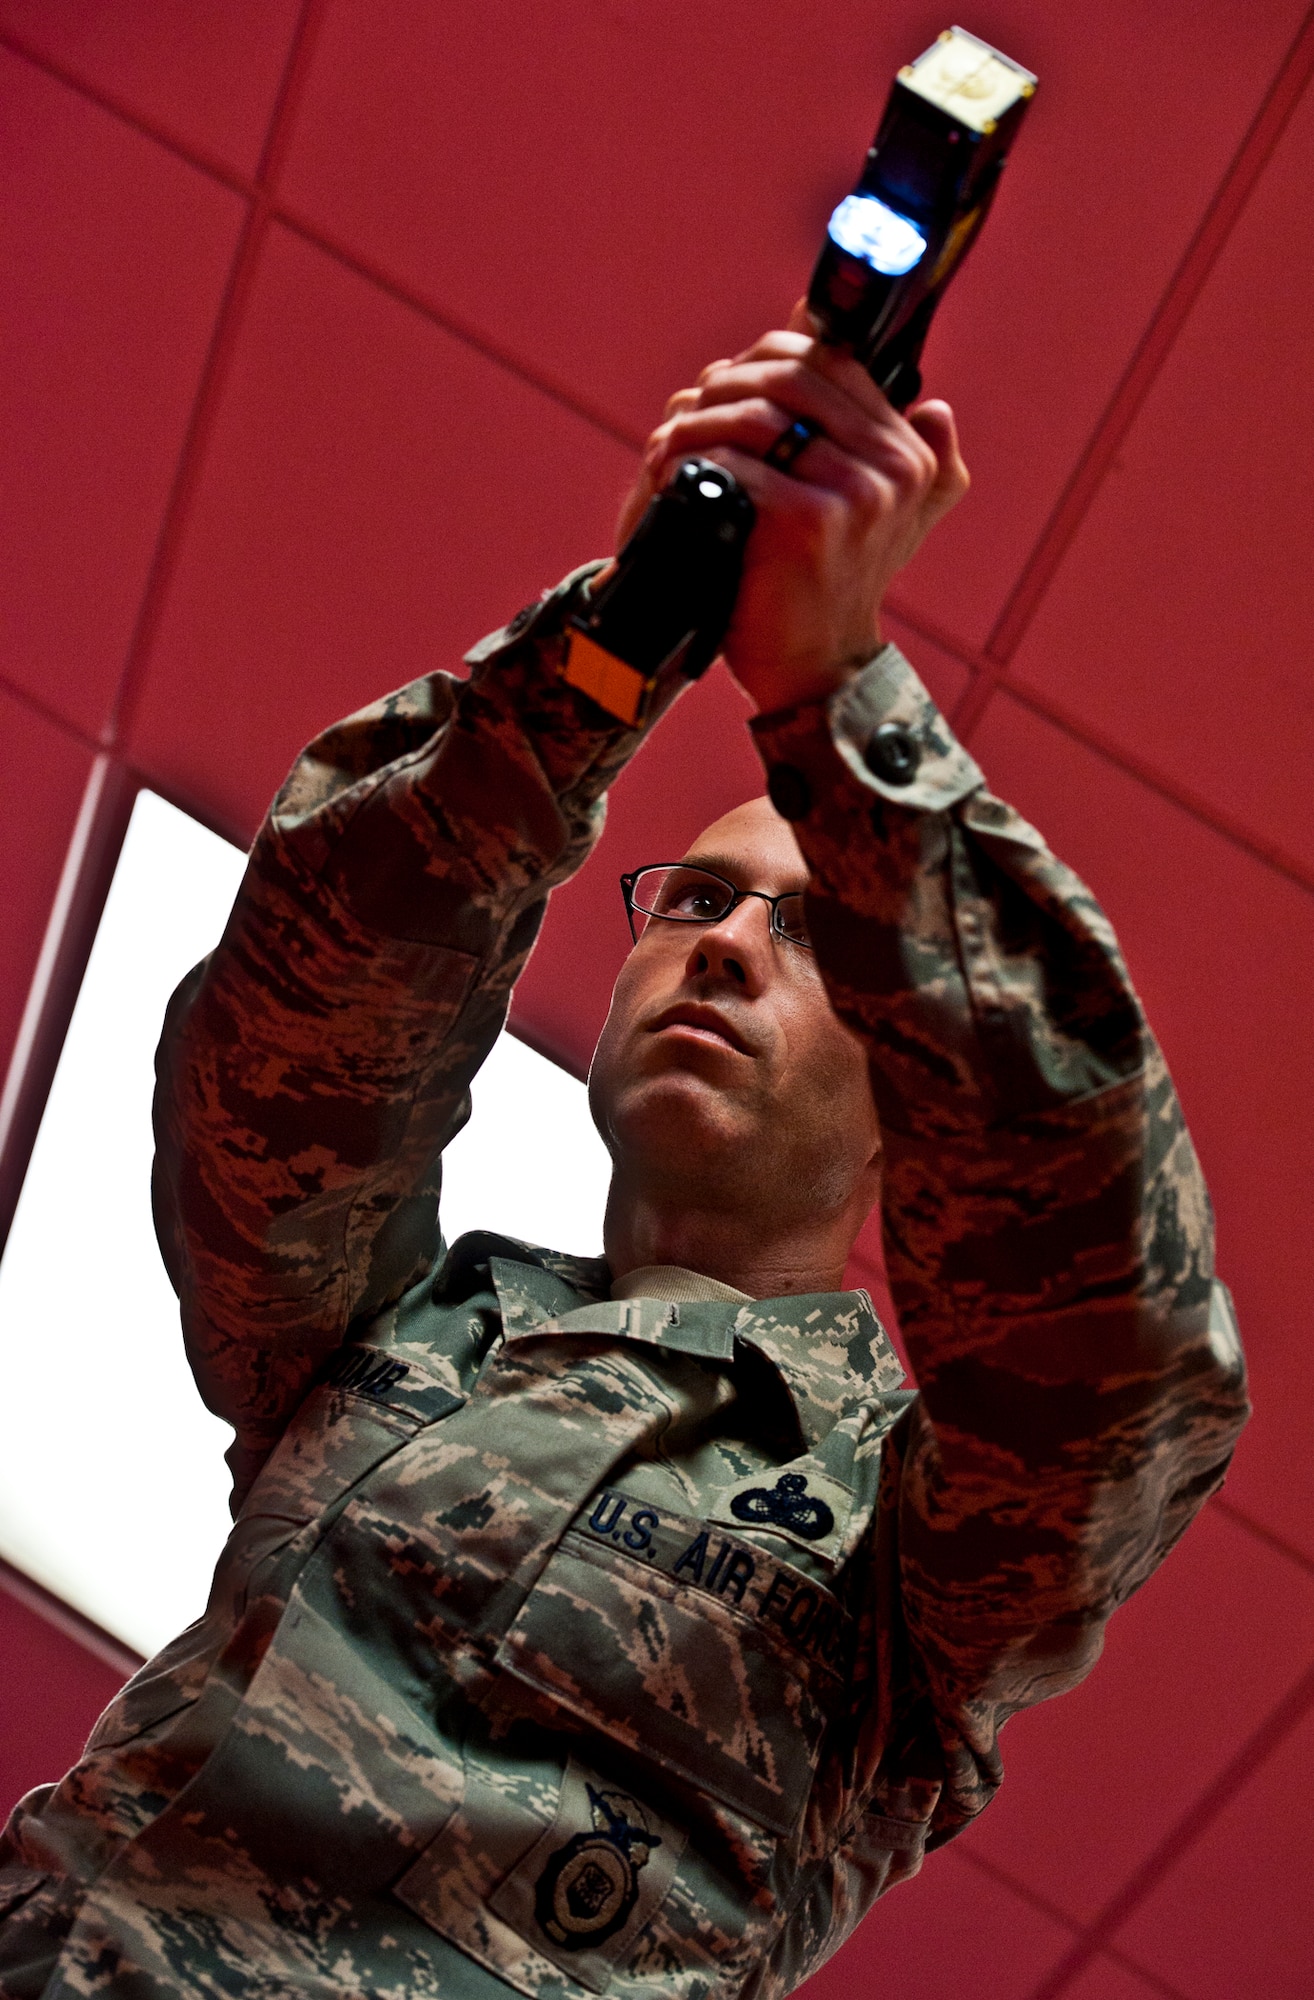 Master Sgt.  William Newcomb, the NCO-in-charge of training for the 96th Security Forces Squadron, fires his X-26 Taser at a target across the room during a demonstration at Eglin Air Force Base, Fla.  All 96 SFS personnel must attend an eight-hour course to carry a taser.  It is required annual training to maintain certification for the device.  16 SFS Airmen and civilians were trained or re-certified through at class Sept. 22.  Six people received exposure to the taser’s 50,000 volts for five seconds to better understand, first-hand, how the body reacts to the shot.  It is not a requirement to receive exposure to the taser to carry the weapon.  (U.S. Air Force photo/Samuel King Jr.)